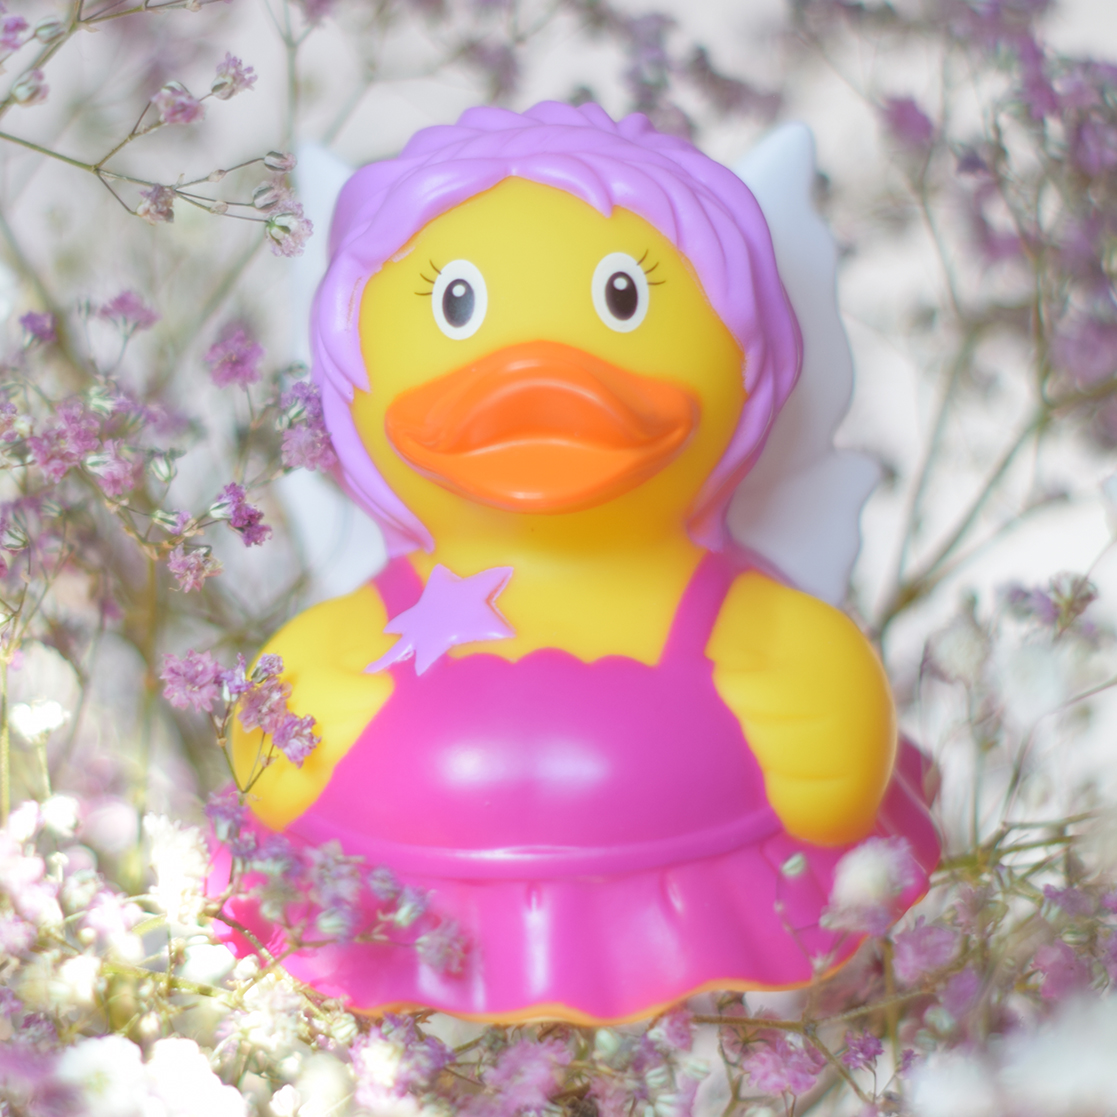 LILALU - SHARE HAPPINESS - Fairy rubber duck - design by LILALU